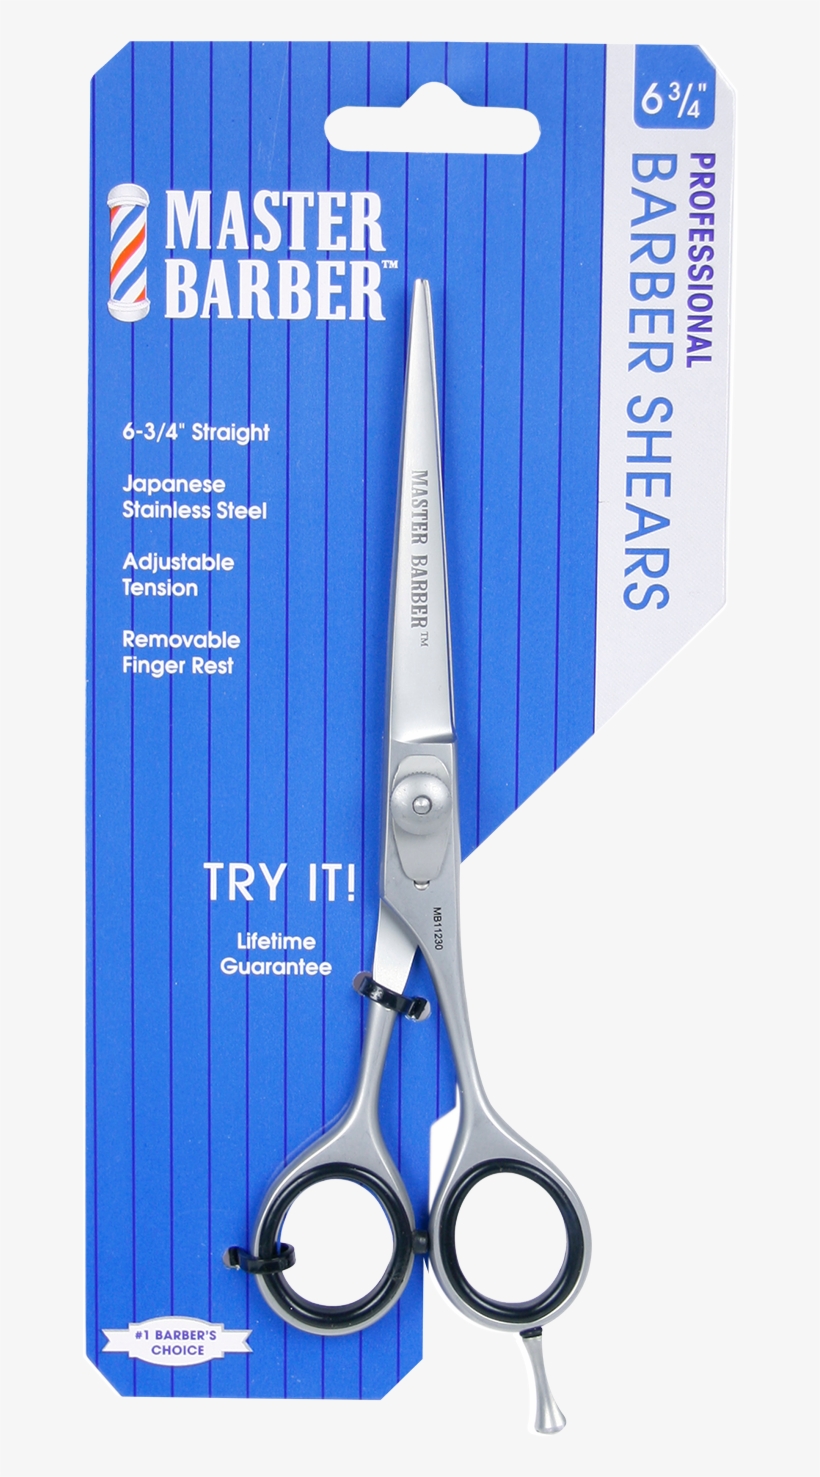 Master Barber Barber Shear - Toolworx Barber Shears, 6.75 Inch By Toolworx, transparent png #426721